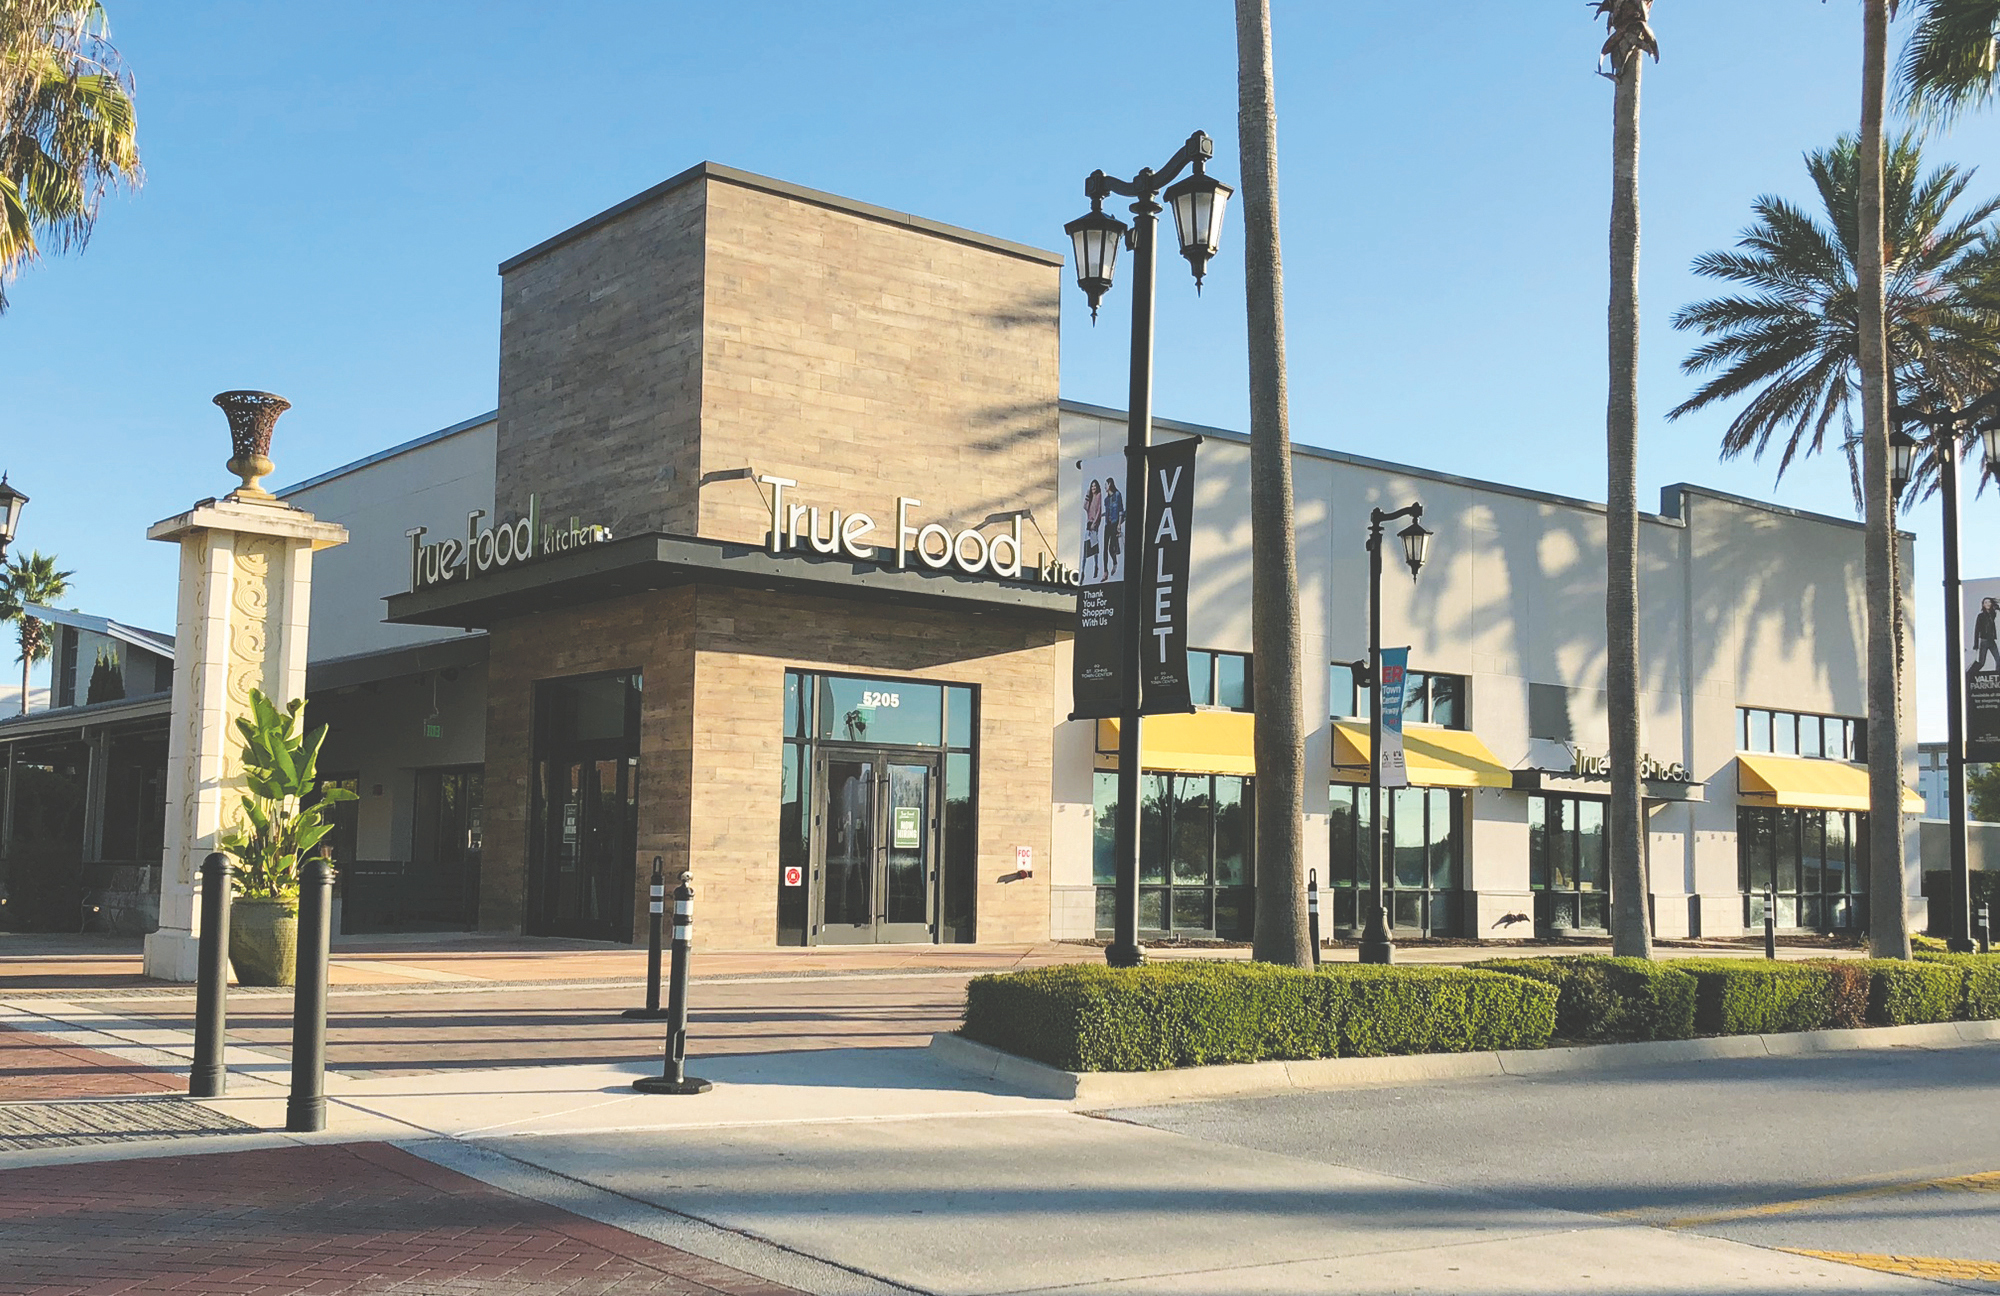 When Mitchell’s Fish Market closed at St. Johns Town Center over New Year’s weekend, the space was leased by True Food Kitchen, which is now hiring and plans to open soon.